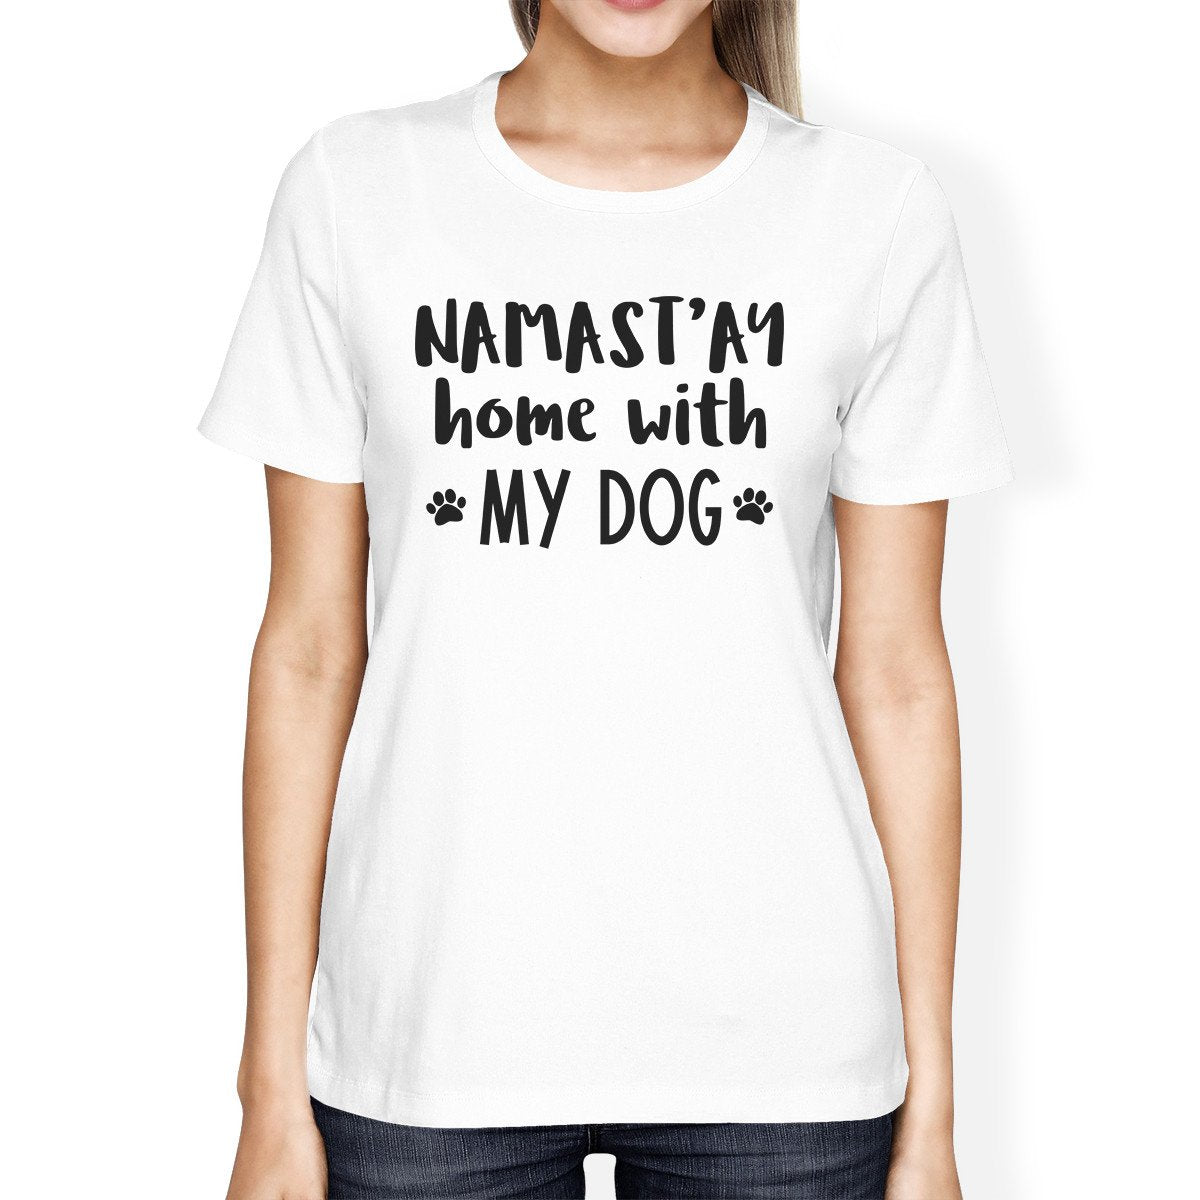 Women&#39;s Fashion - Women&#39;s Clothing - Tops &amp; Tees - T-Shirts Namastay Women&#39;s White Crew Neck T-Shirt Unique Design for Her